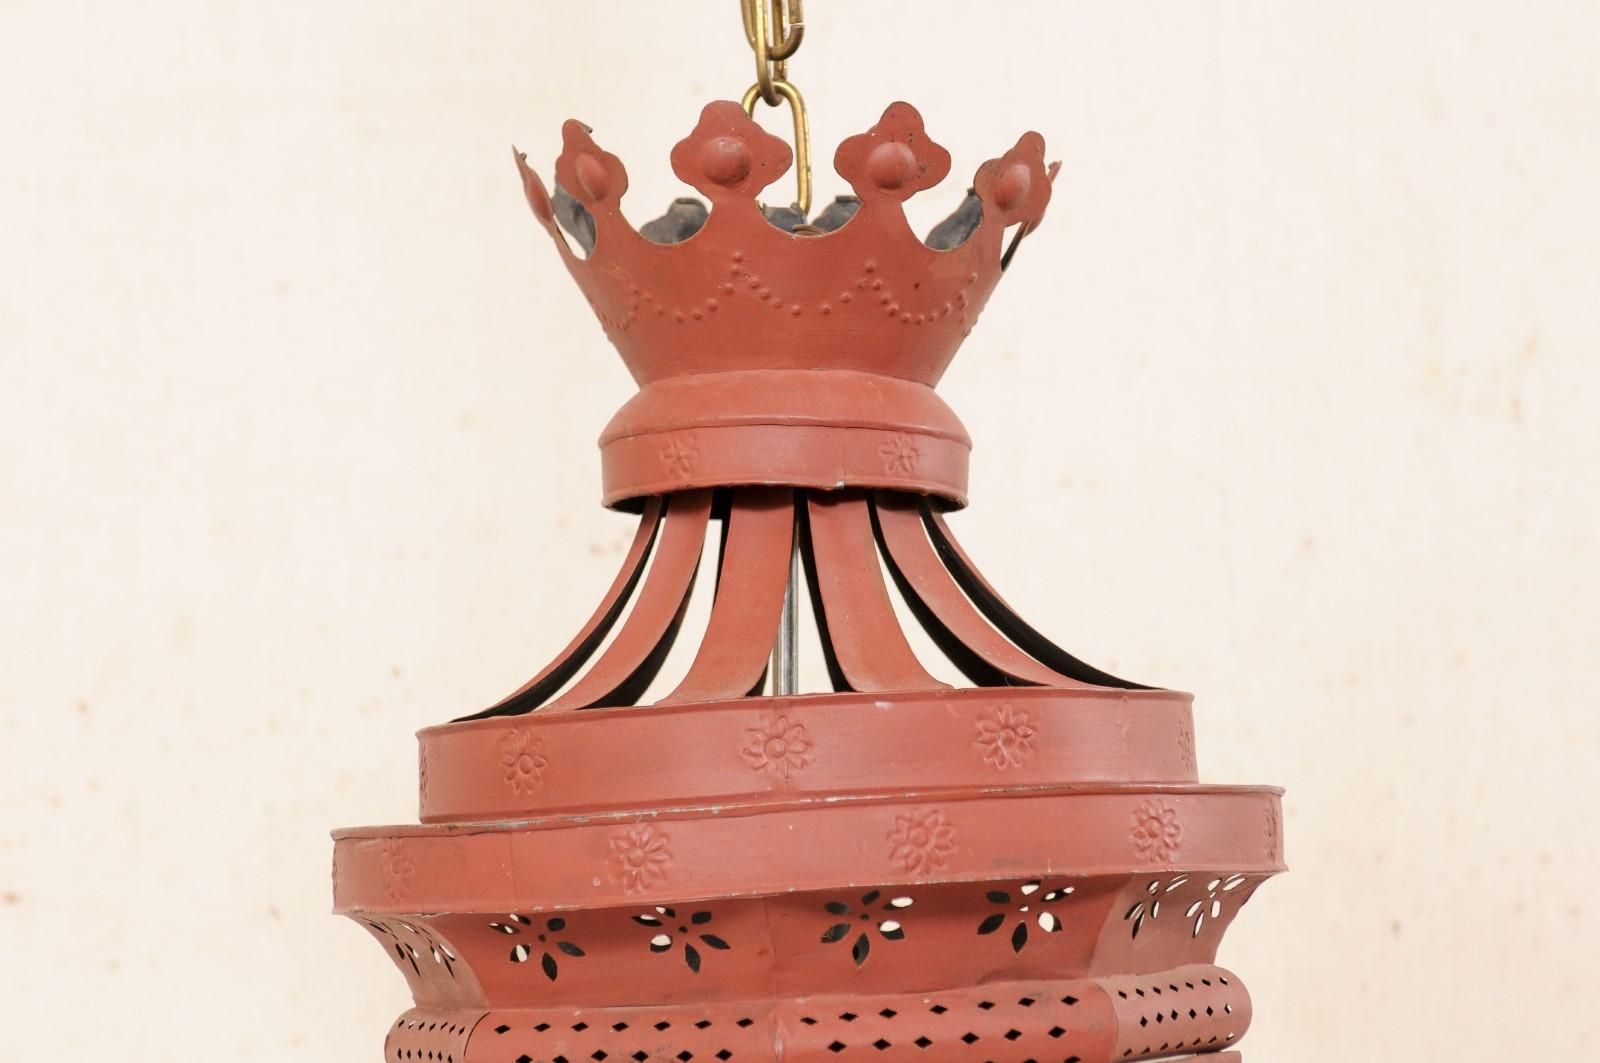 20th Century An Italian Red Tole Metal Single-Light Lantern with Crown Top, Early 20th C.